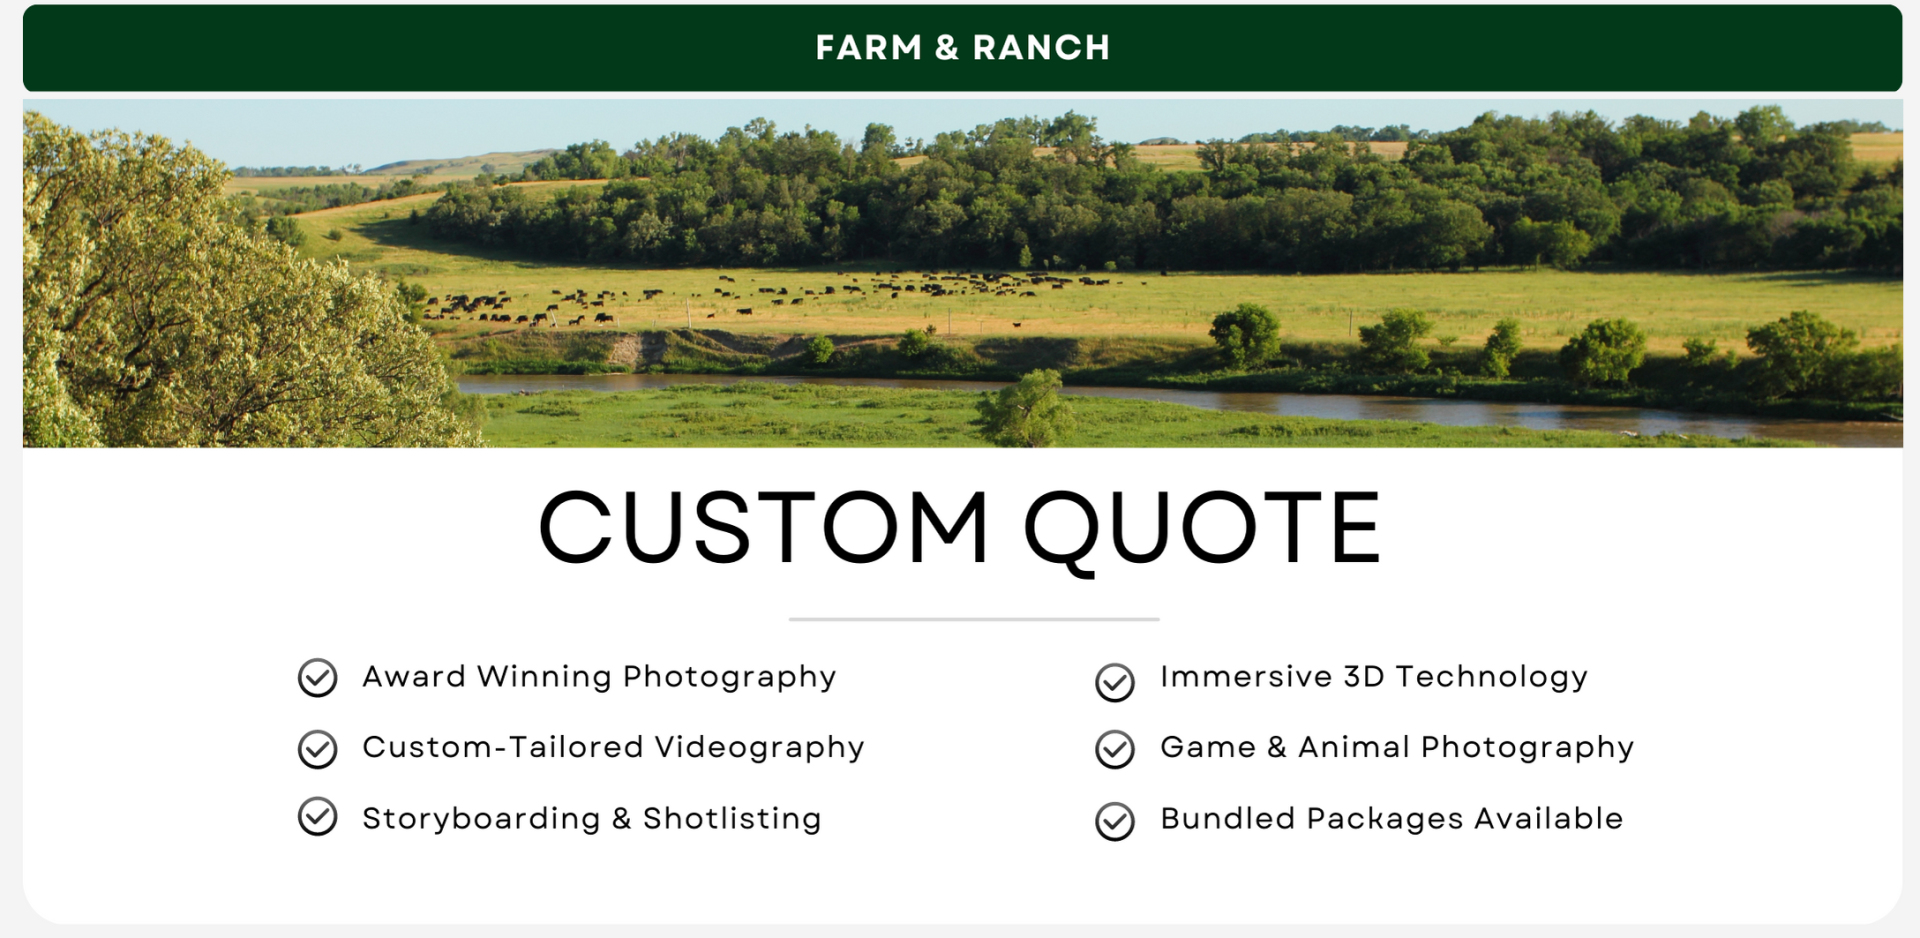 Farm and Ranch Photography Pricing